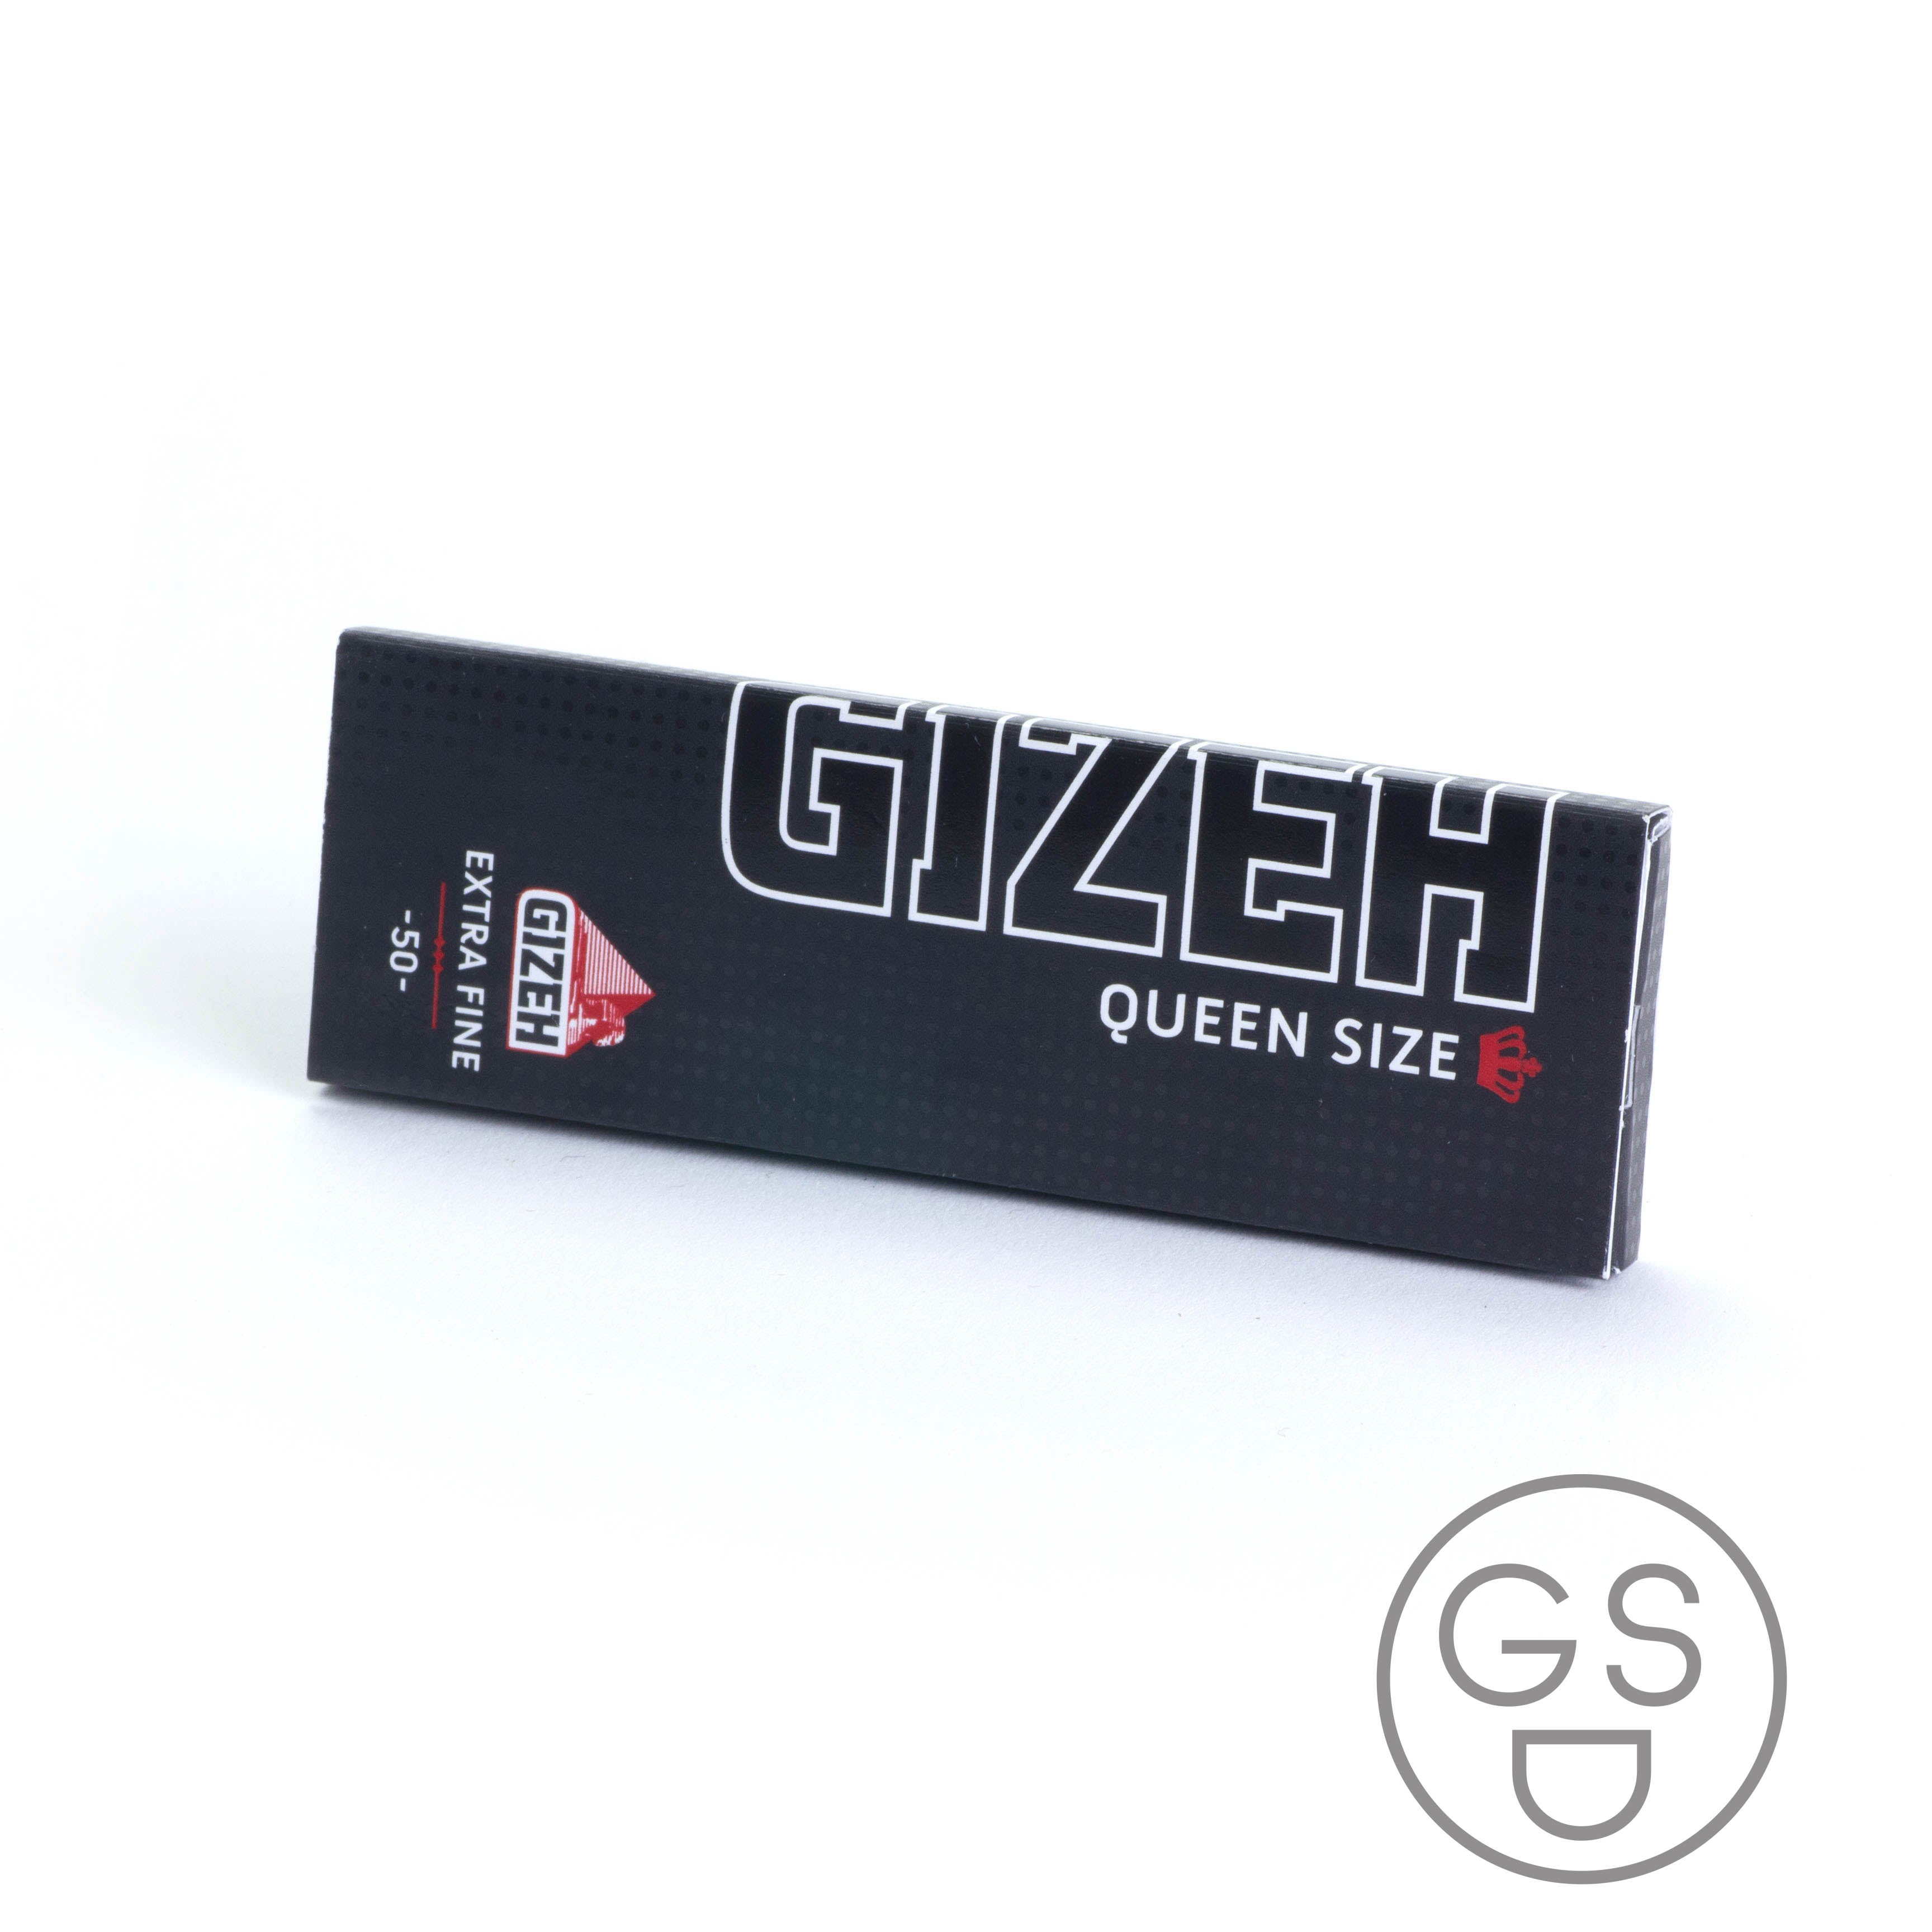 Gizeh Black Queen size 1 1/4 papers